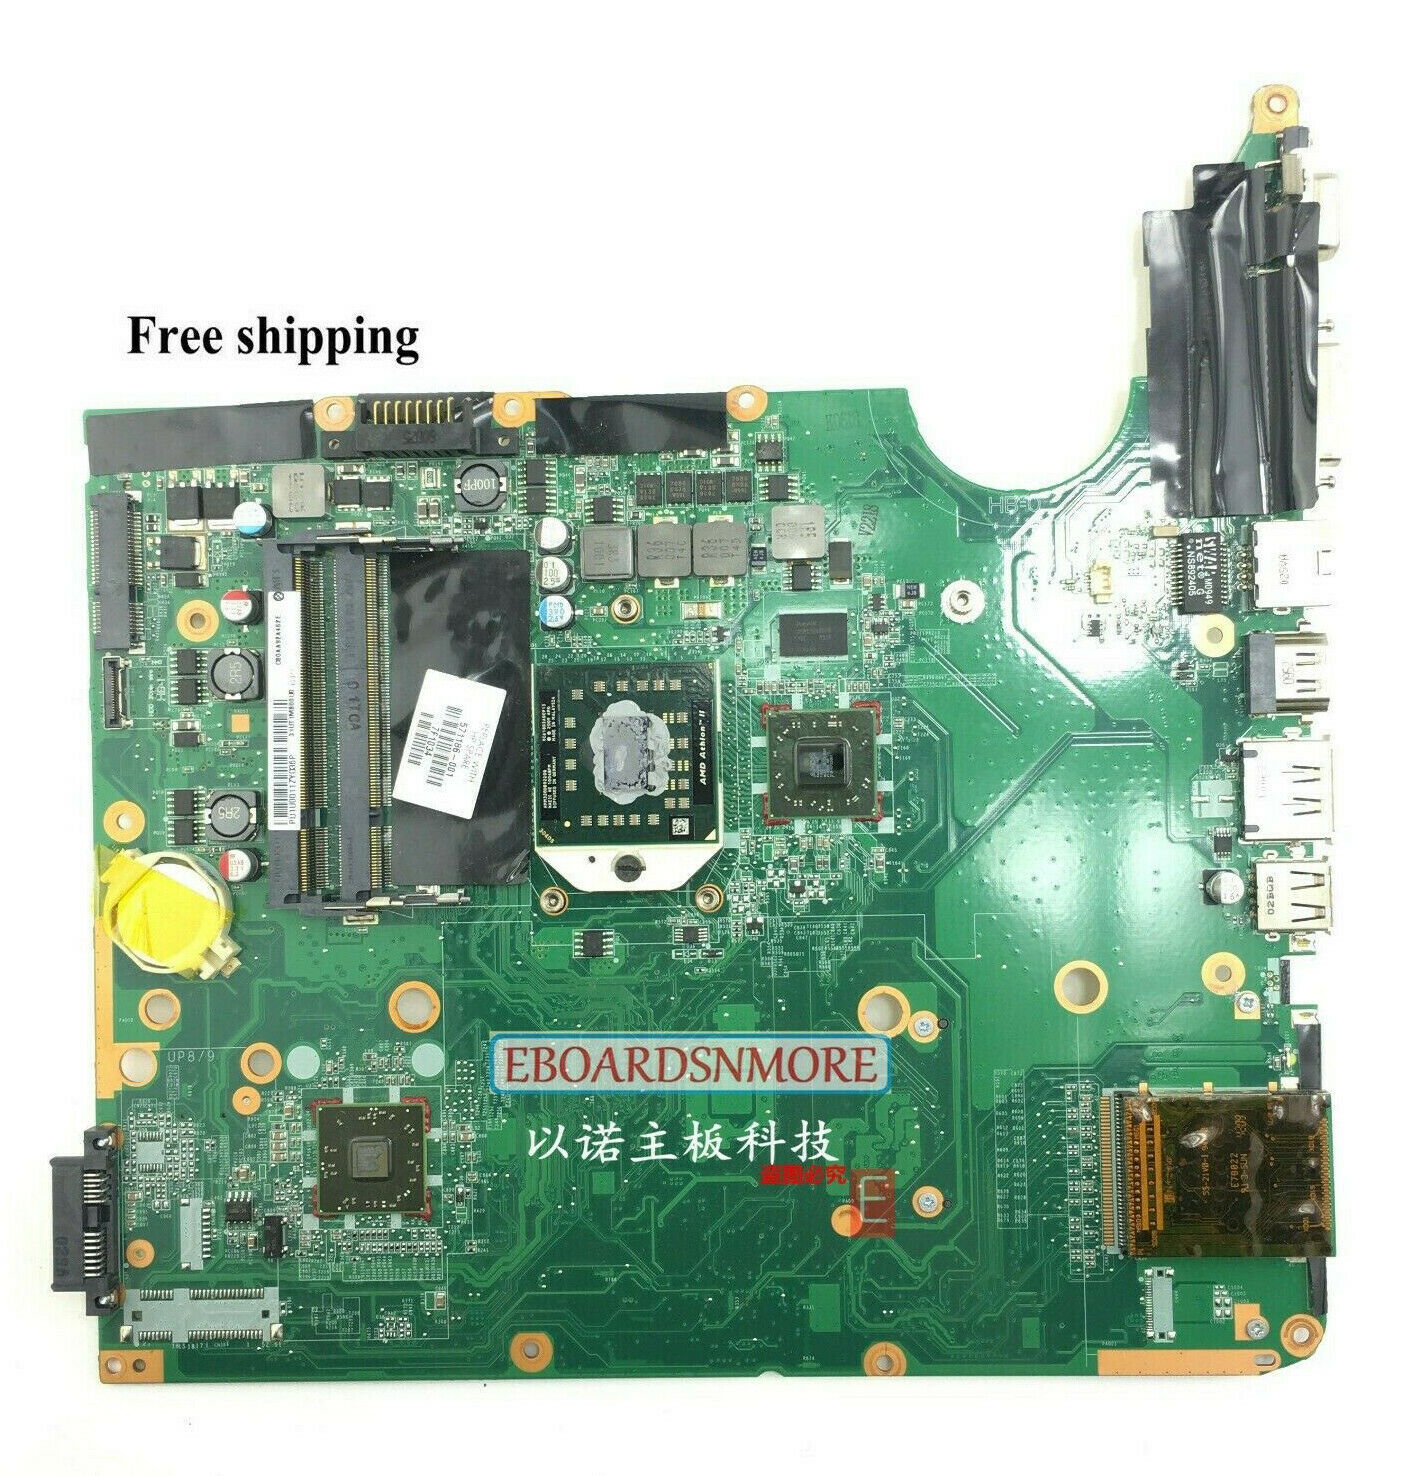 571186-001 AMD MOTHERBOARD for HP PAVILION DV6-2000 -2100 Laptop, ATI HD4250 A Compatible CPU Brand: AMD Me